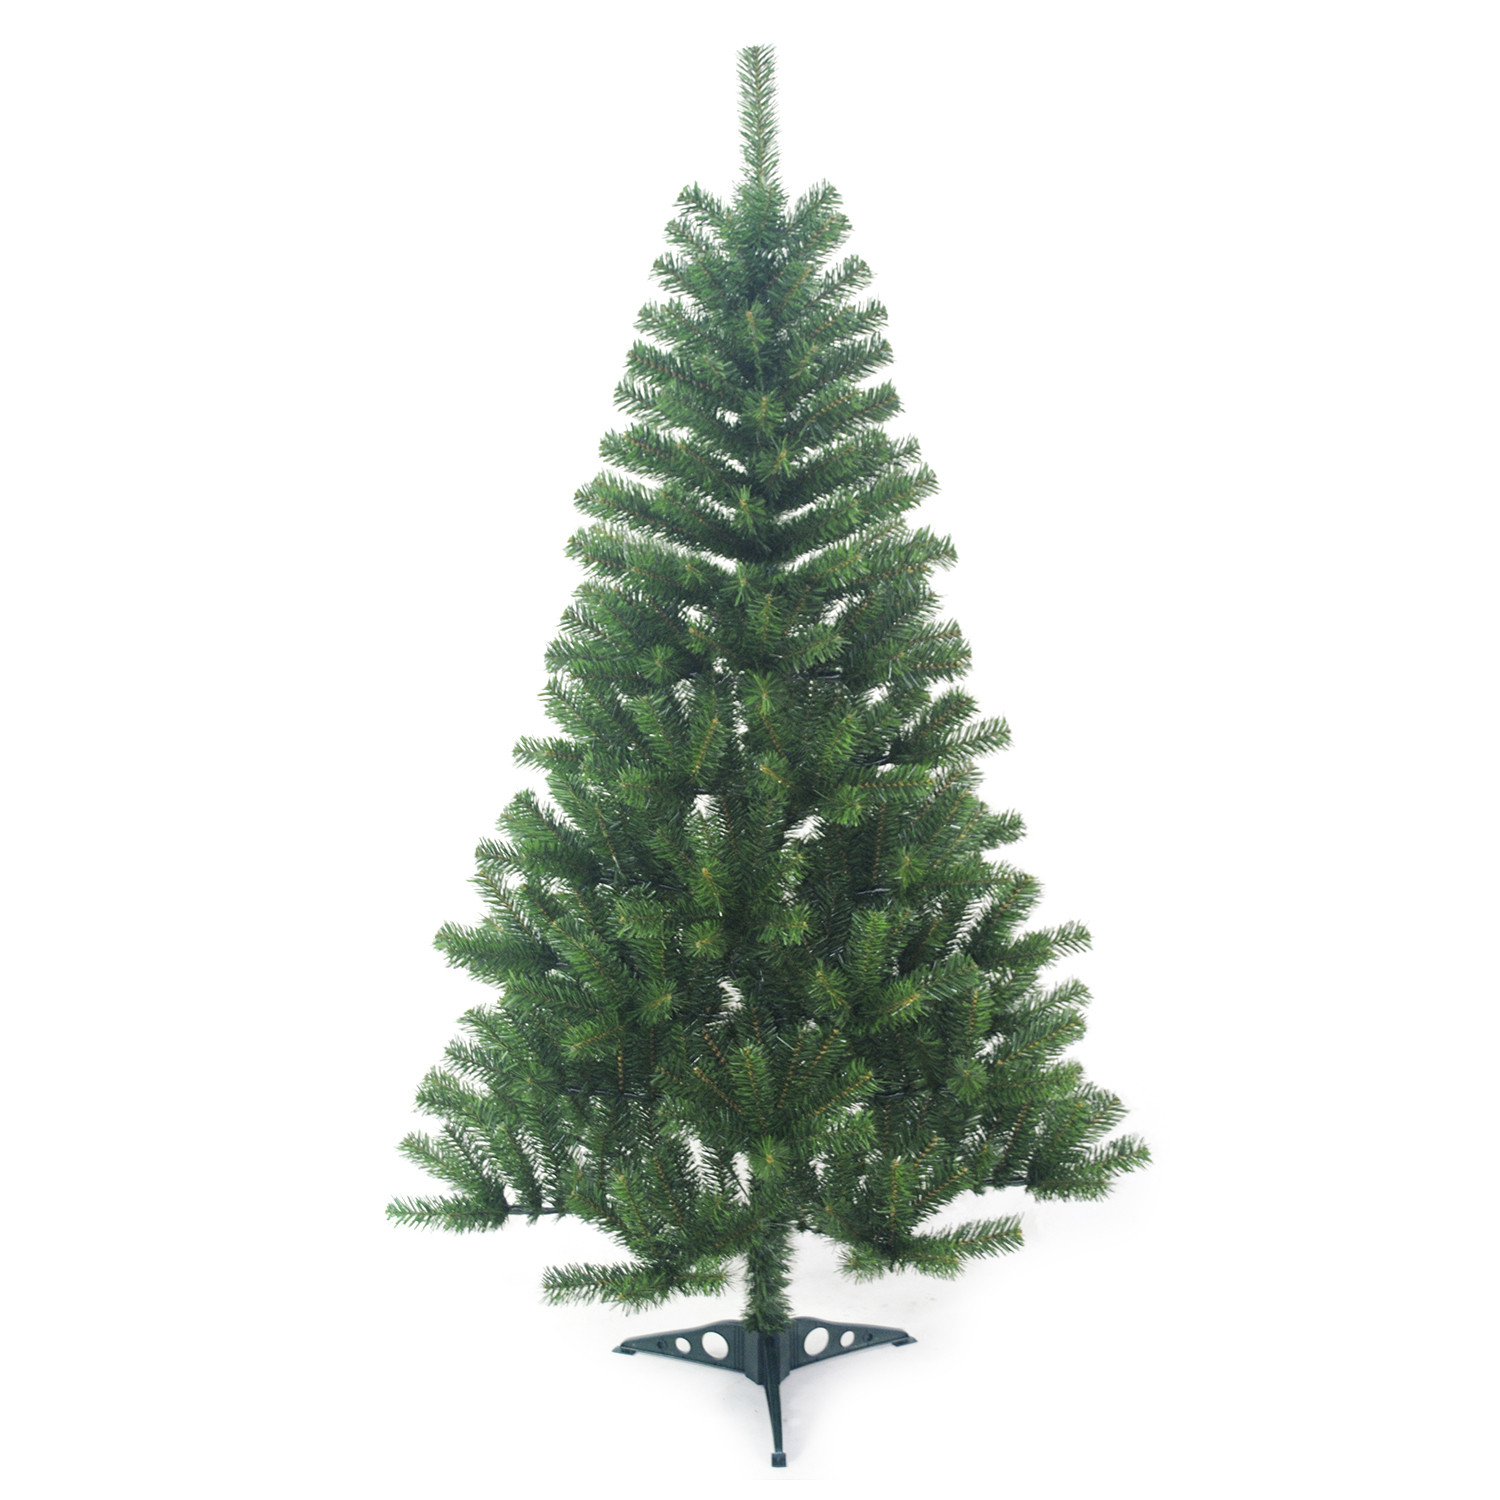 Norway Spruce Artifical Christmas Tree 6ft Image 1